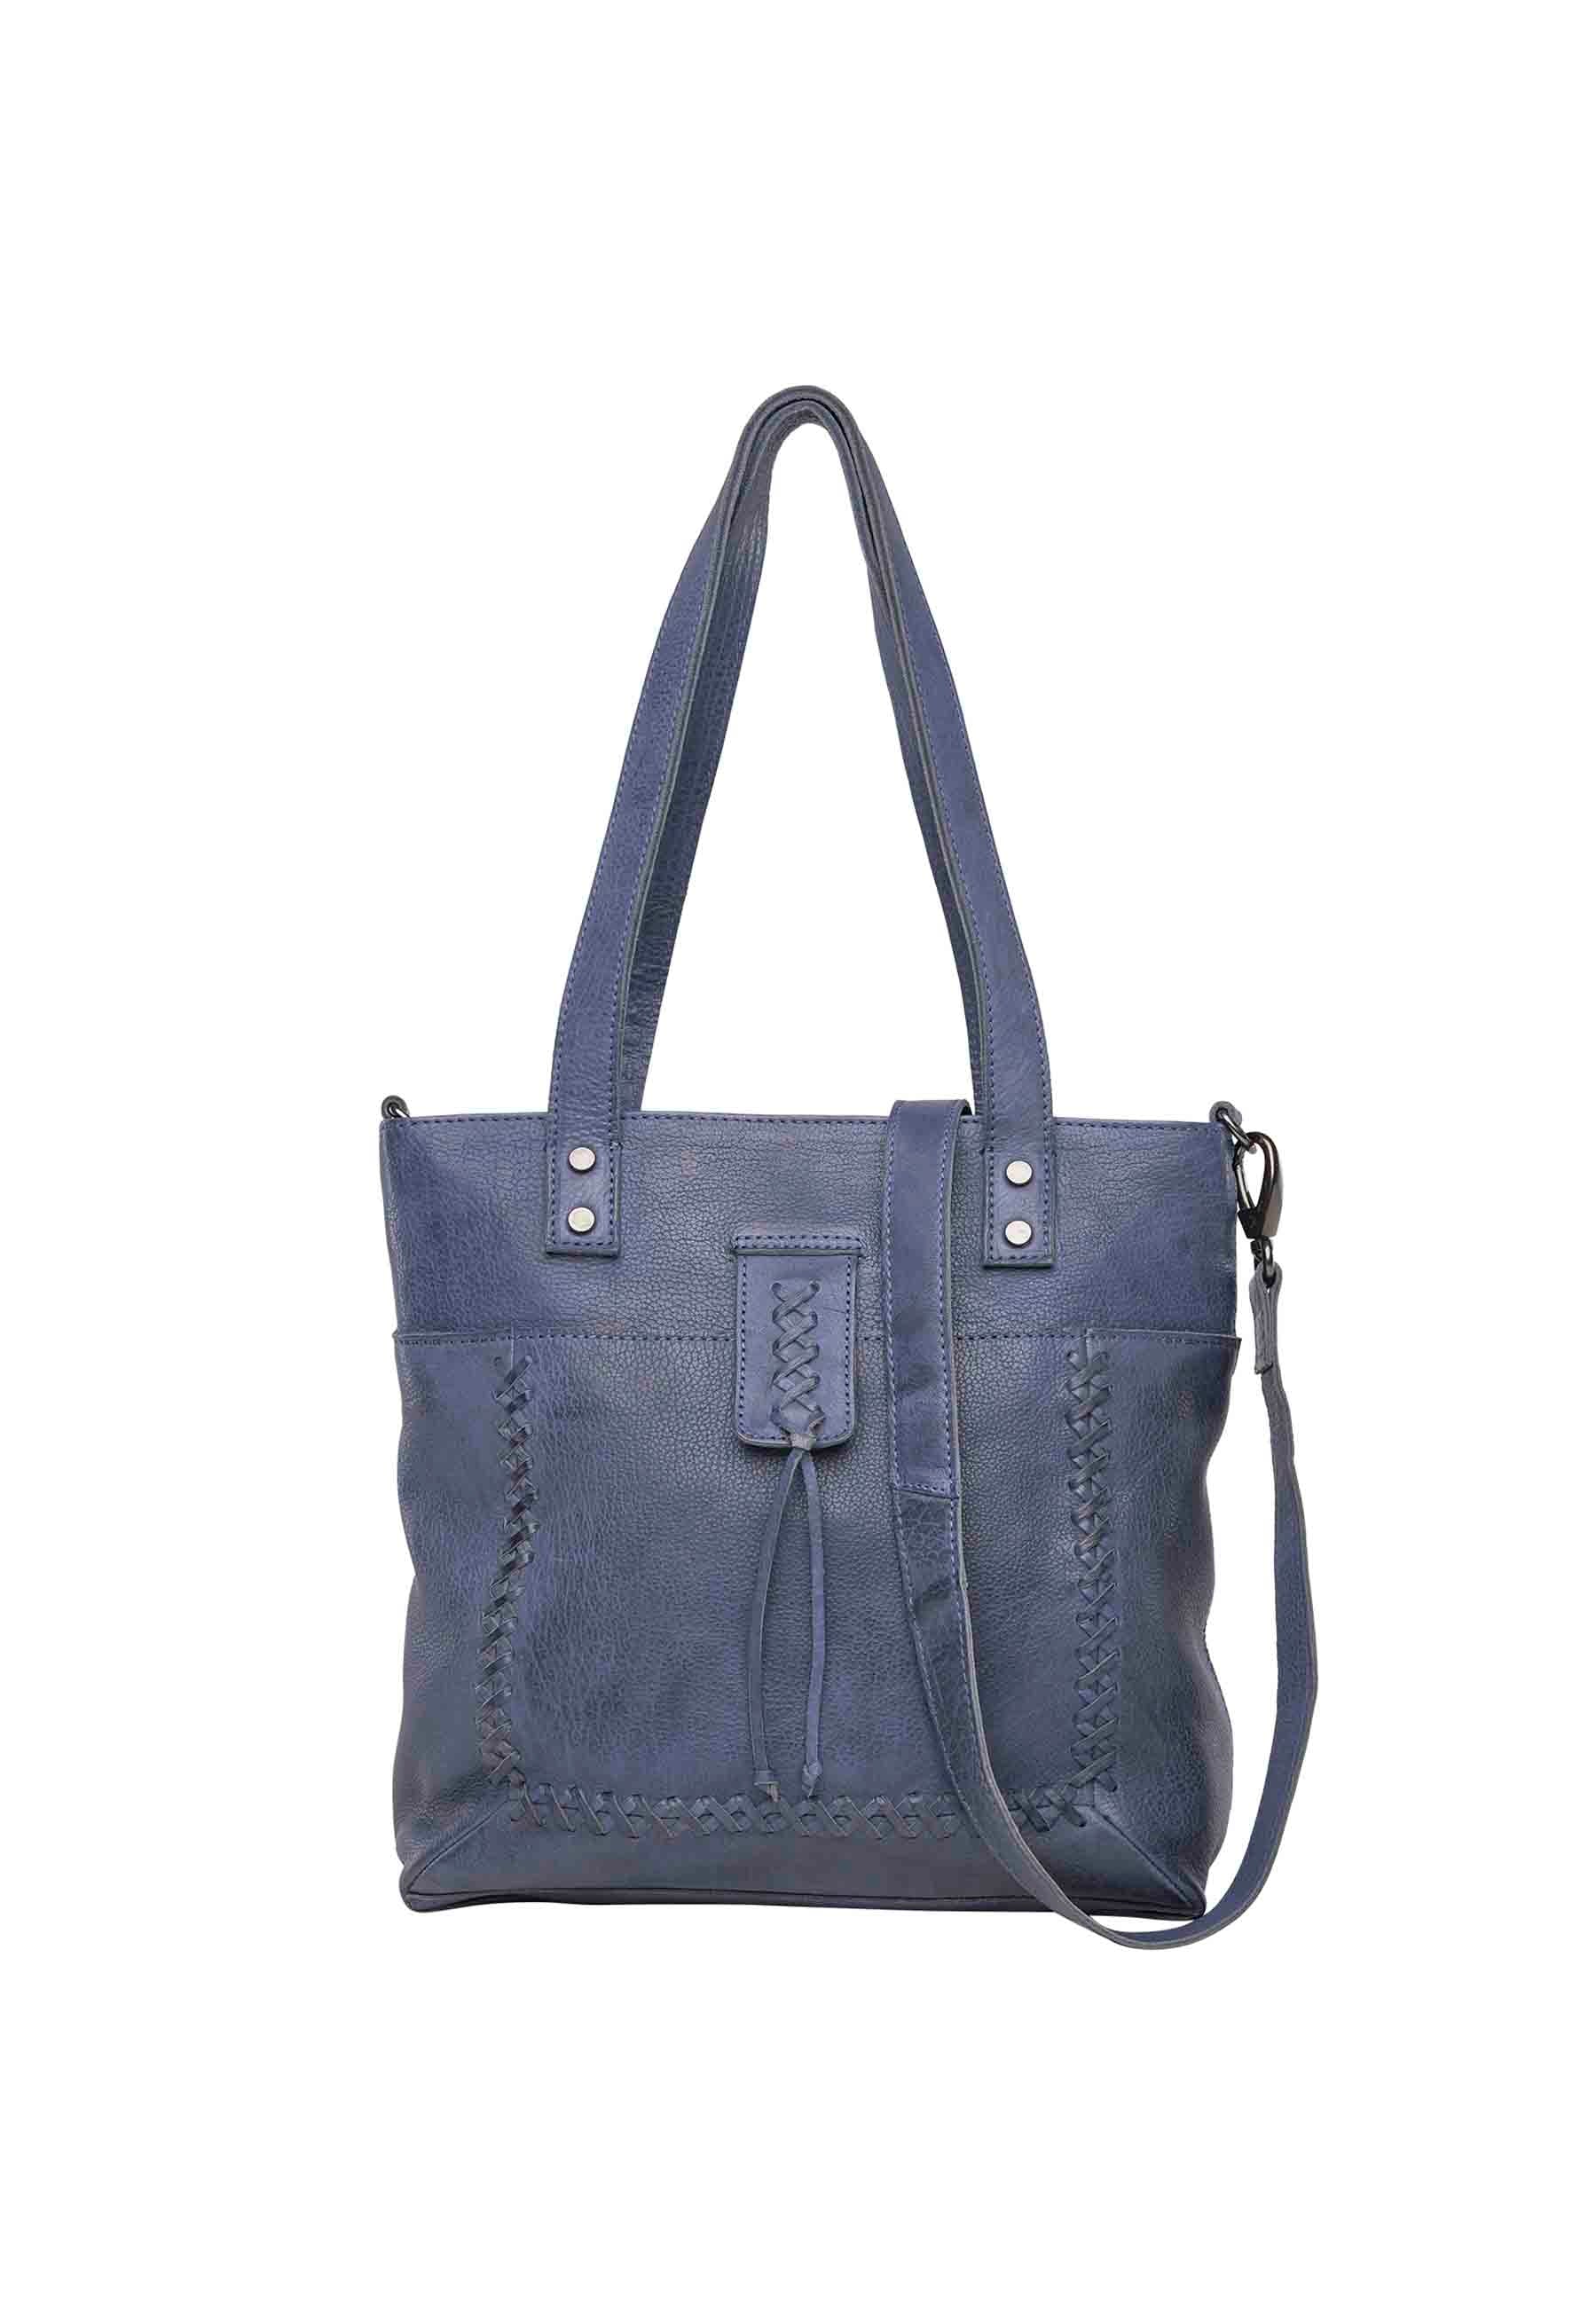 front view of blue leather concealed carry handbag